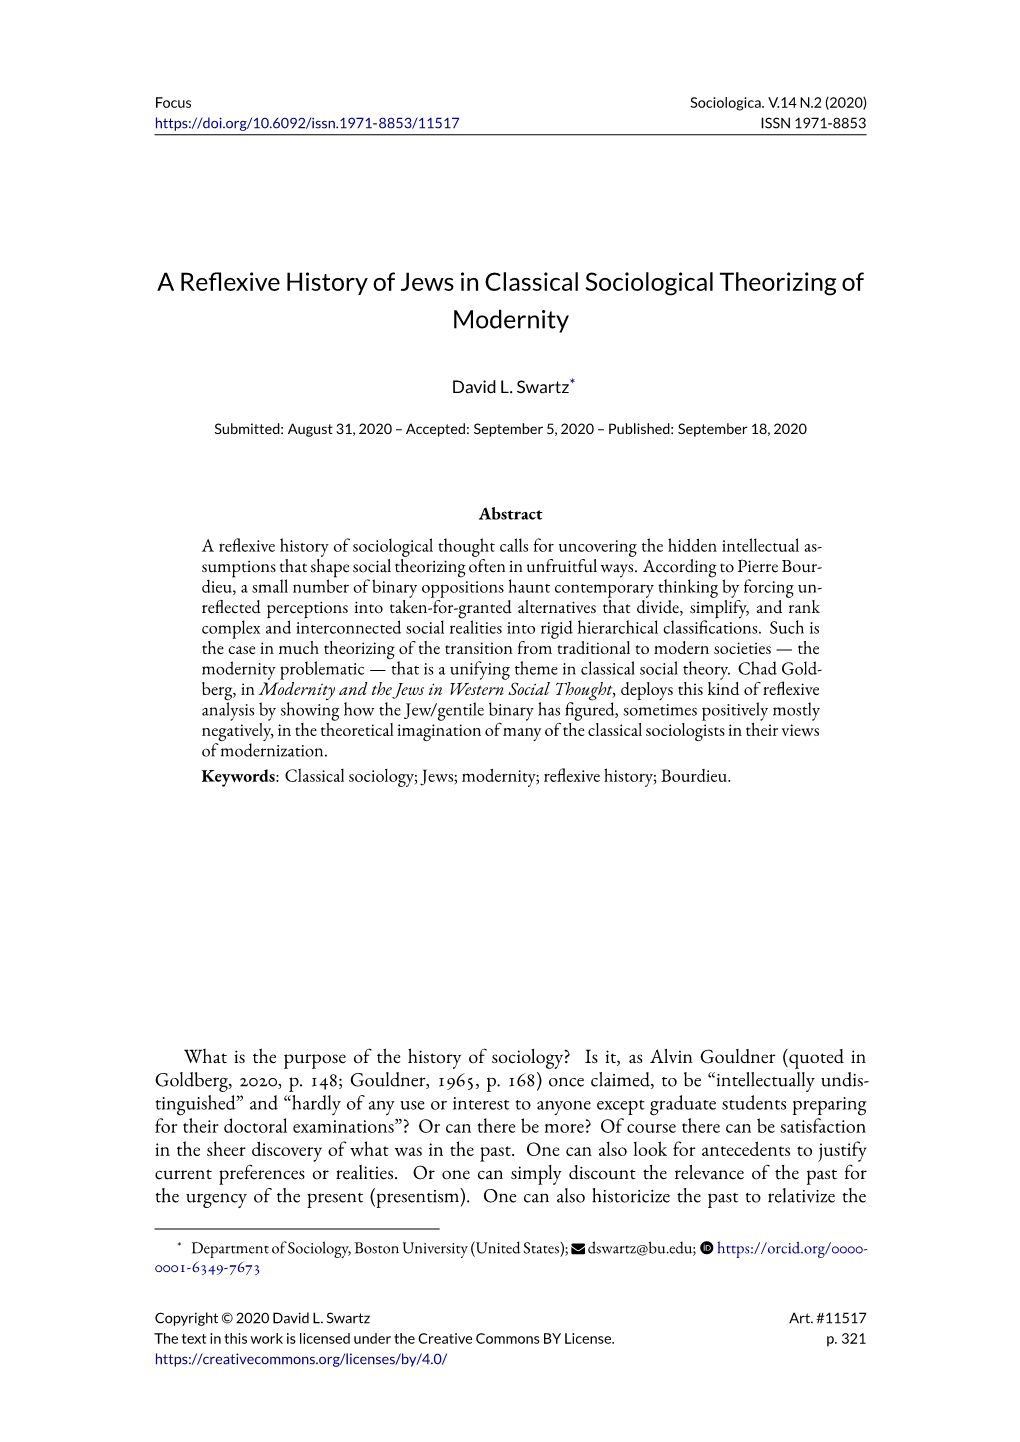 A Reflexive History of Jews in Classical Sociological Theorizing of Modernity